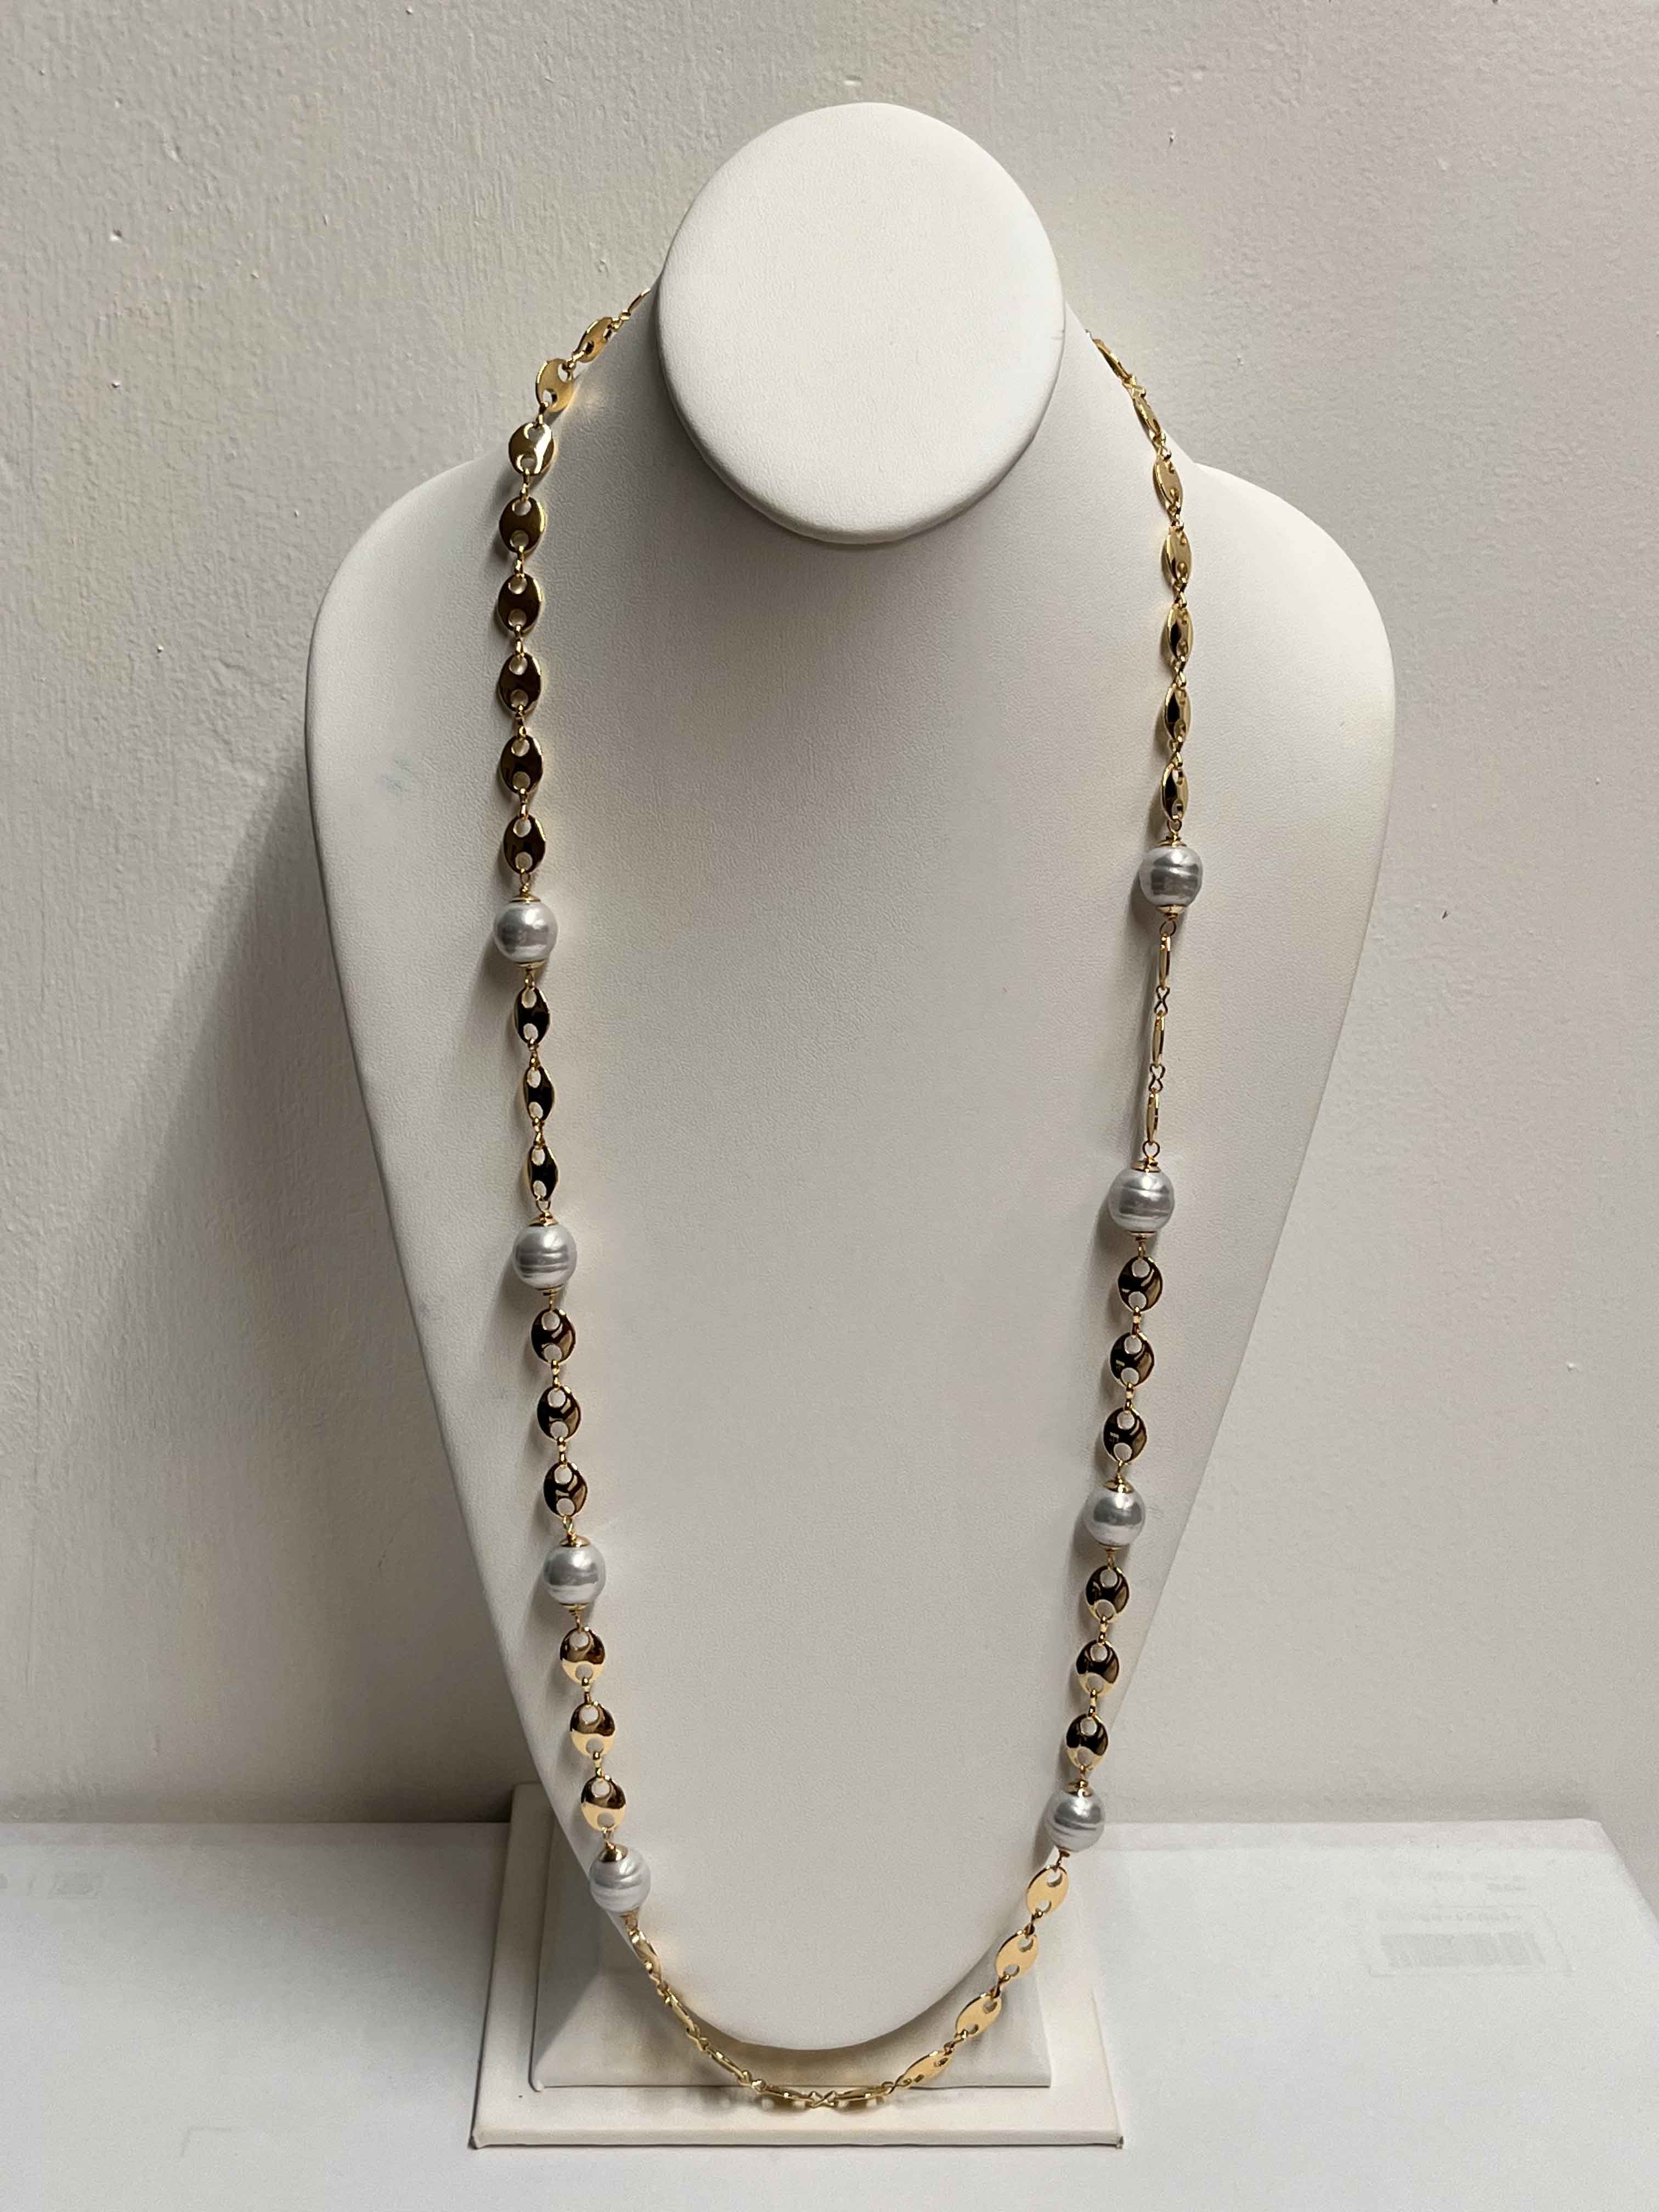 Necklace mallorca pearls gold plated white pearls - Item # 18811